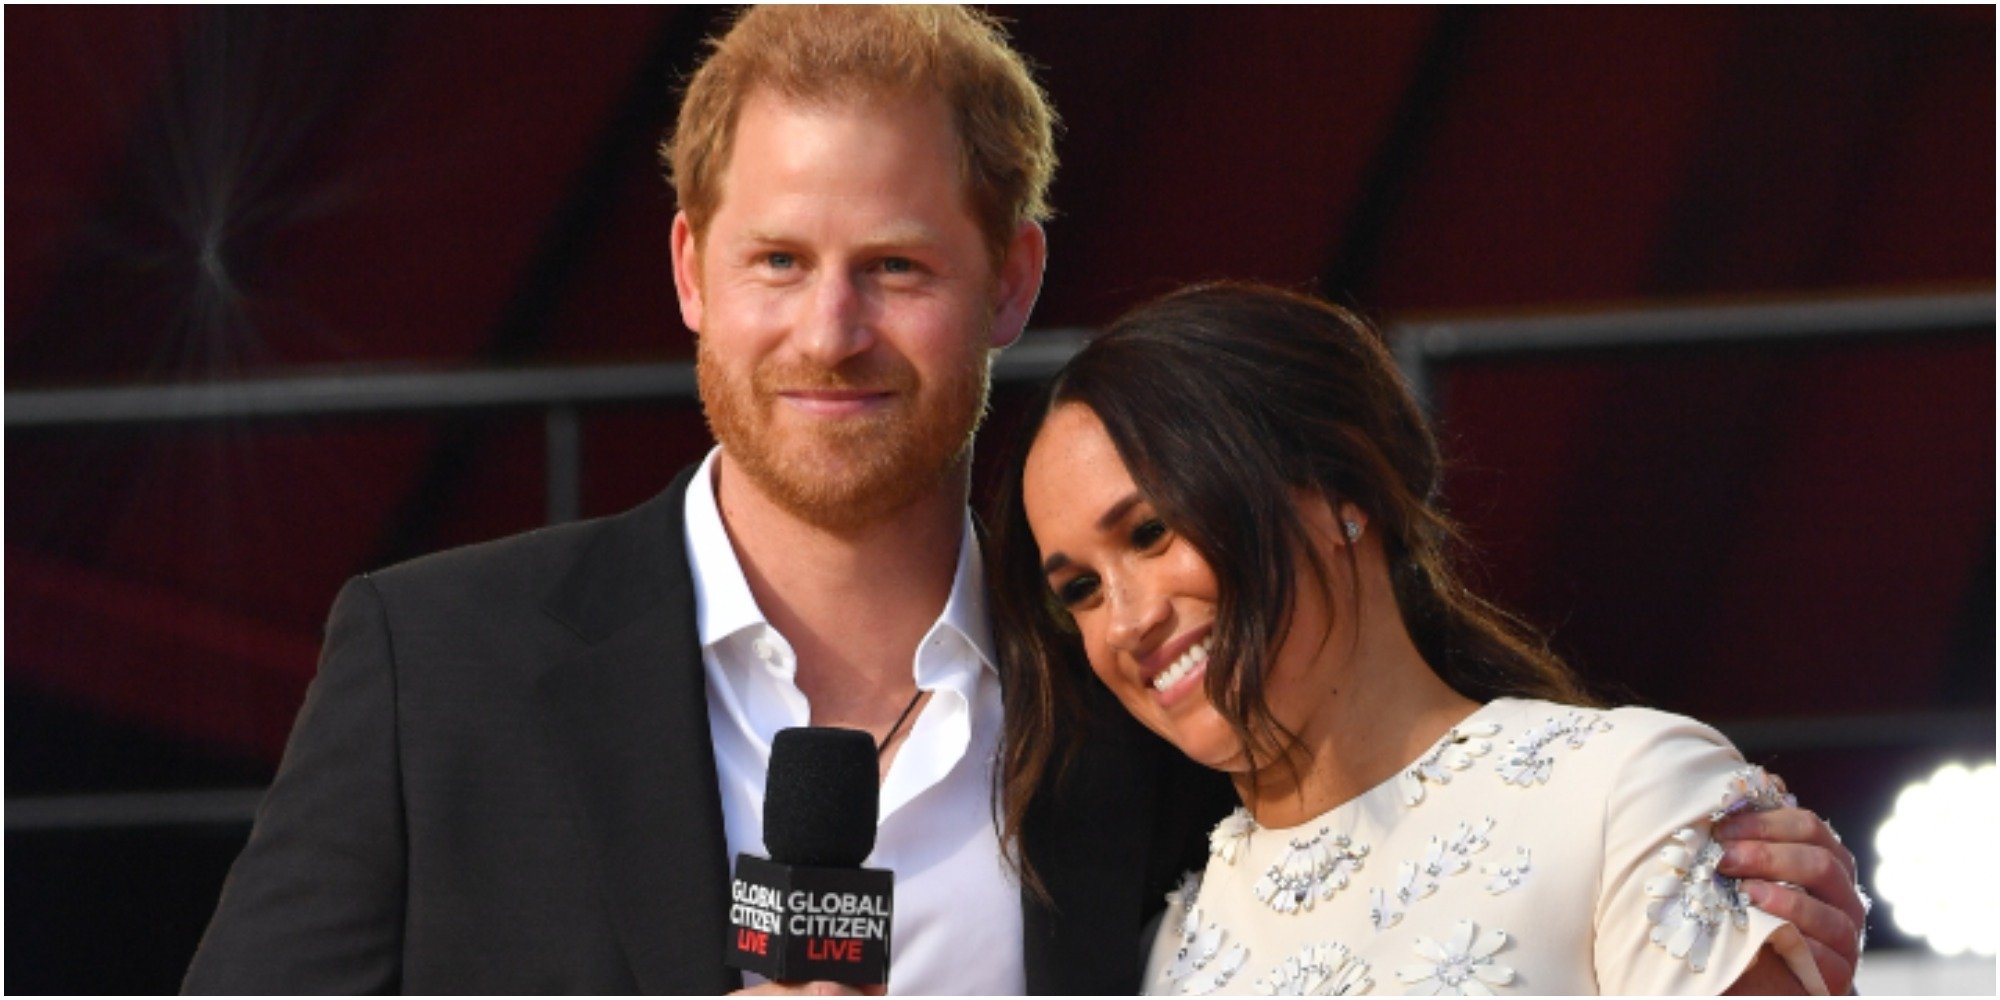 Meghan Markle and Prince Harry depart the Global Citizen concert in Central Park on September 25, 2021 in New York City.